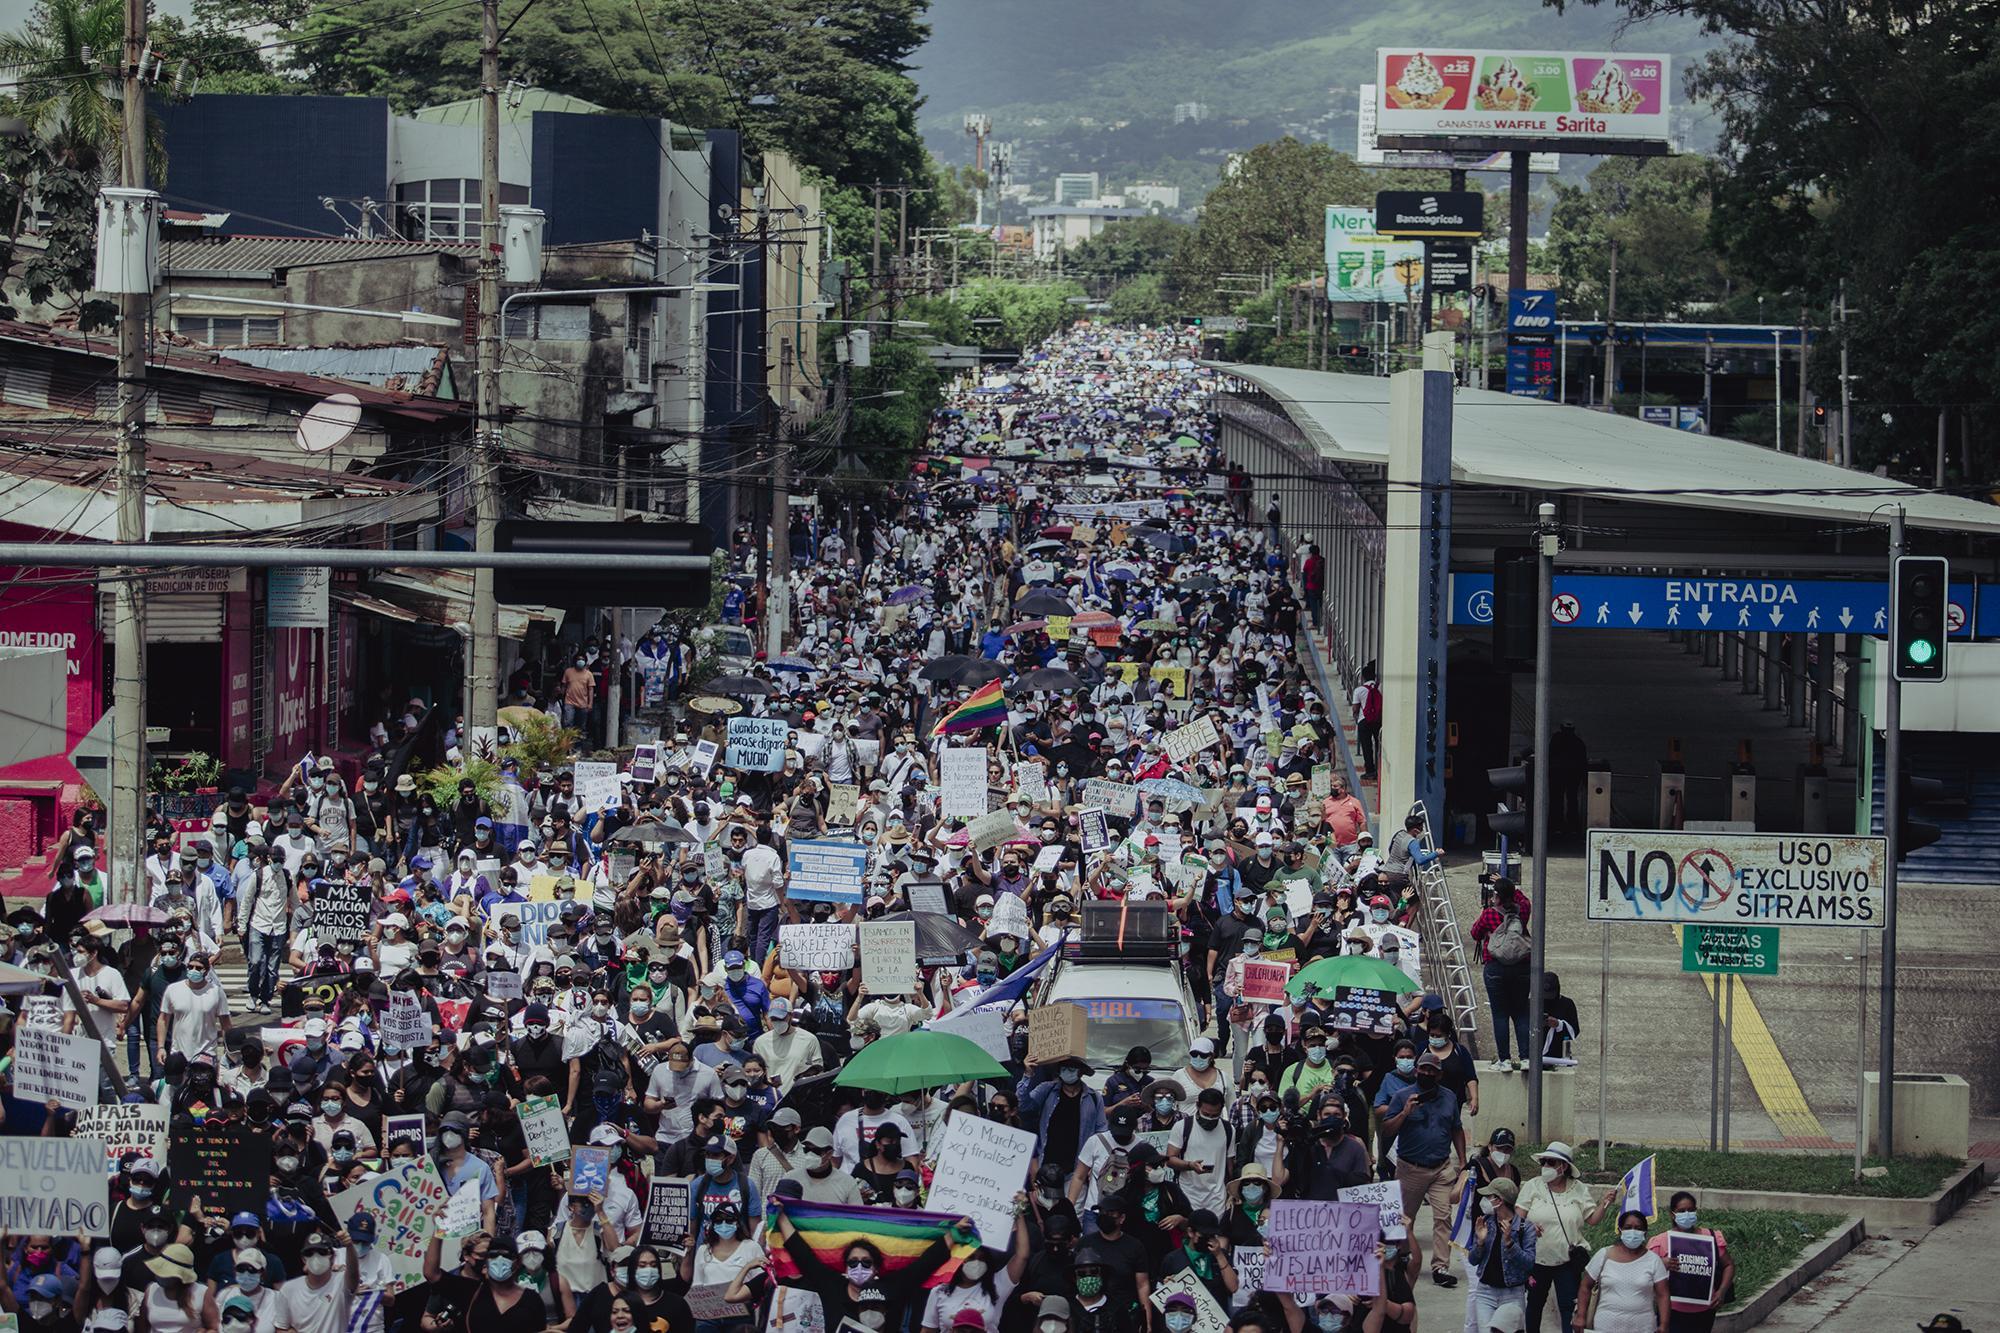 Thousands of people marched from the Cuscatlán Park, and other meeting points in San Salvador, toward Morazán Plaza in the historic city center, to protest against the Bukele government and the recent laws approved by the Legislative Assembly controlled by his party, like the Bitcoin Law and a law that purges 30 percent of the judges in the country.